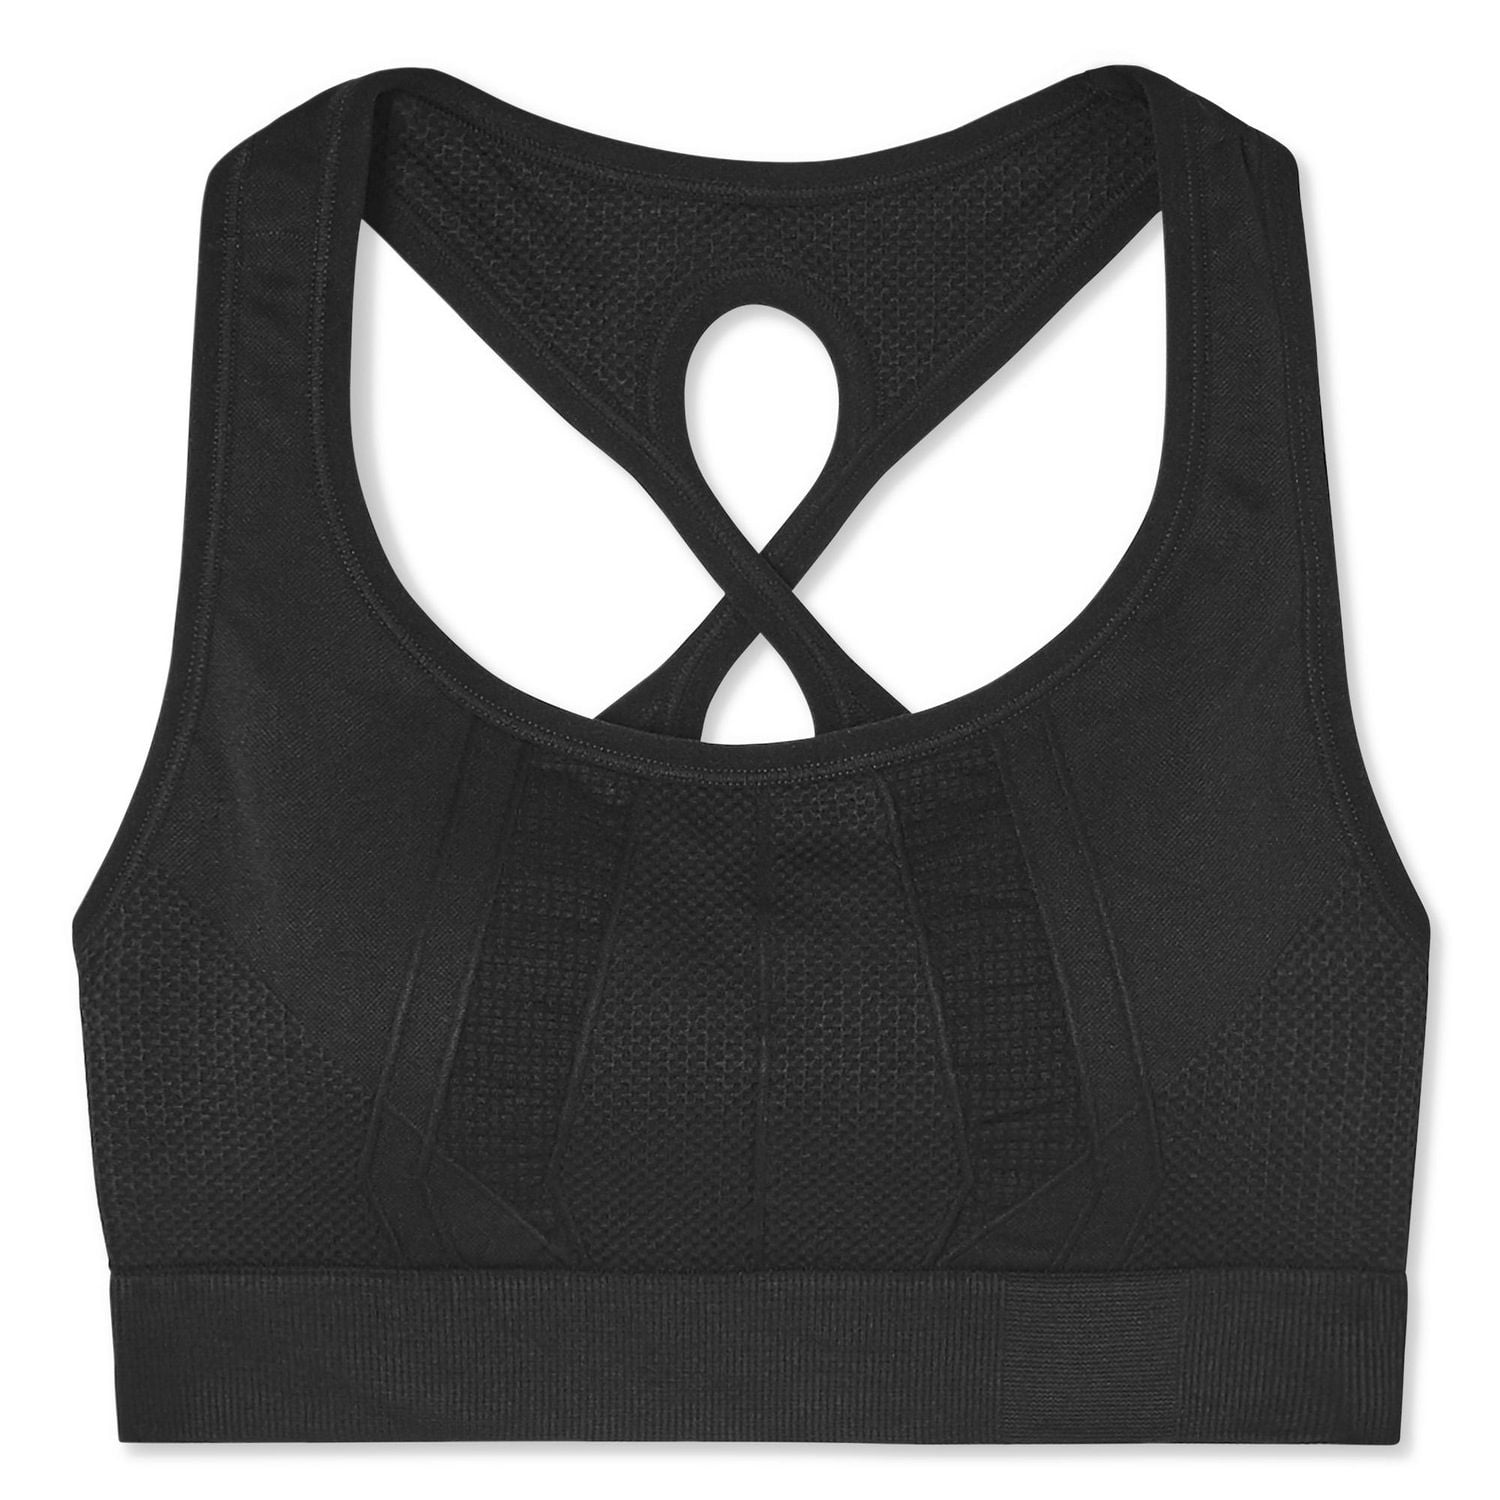 500 Women's Fitness Cardio Training Sports Bra - Black  A comfortable  sports bra that you won't be able to live without thanks to its cross-over  straps at the back, the mesh